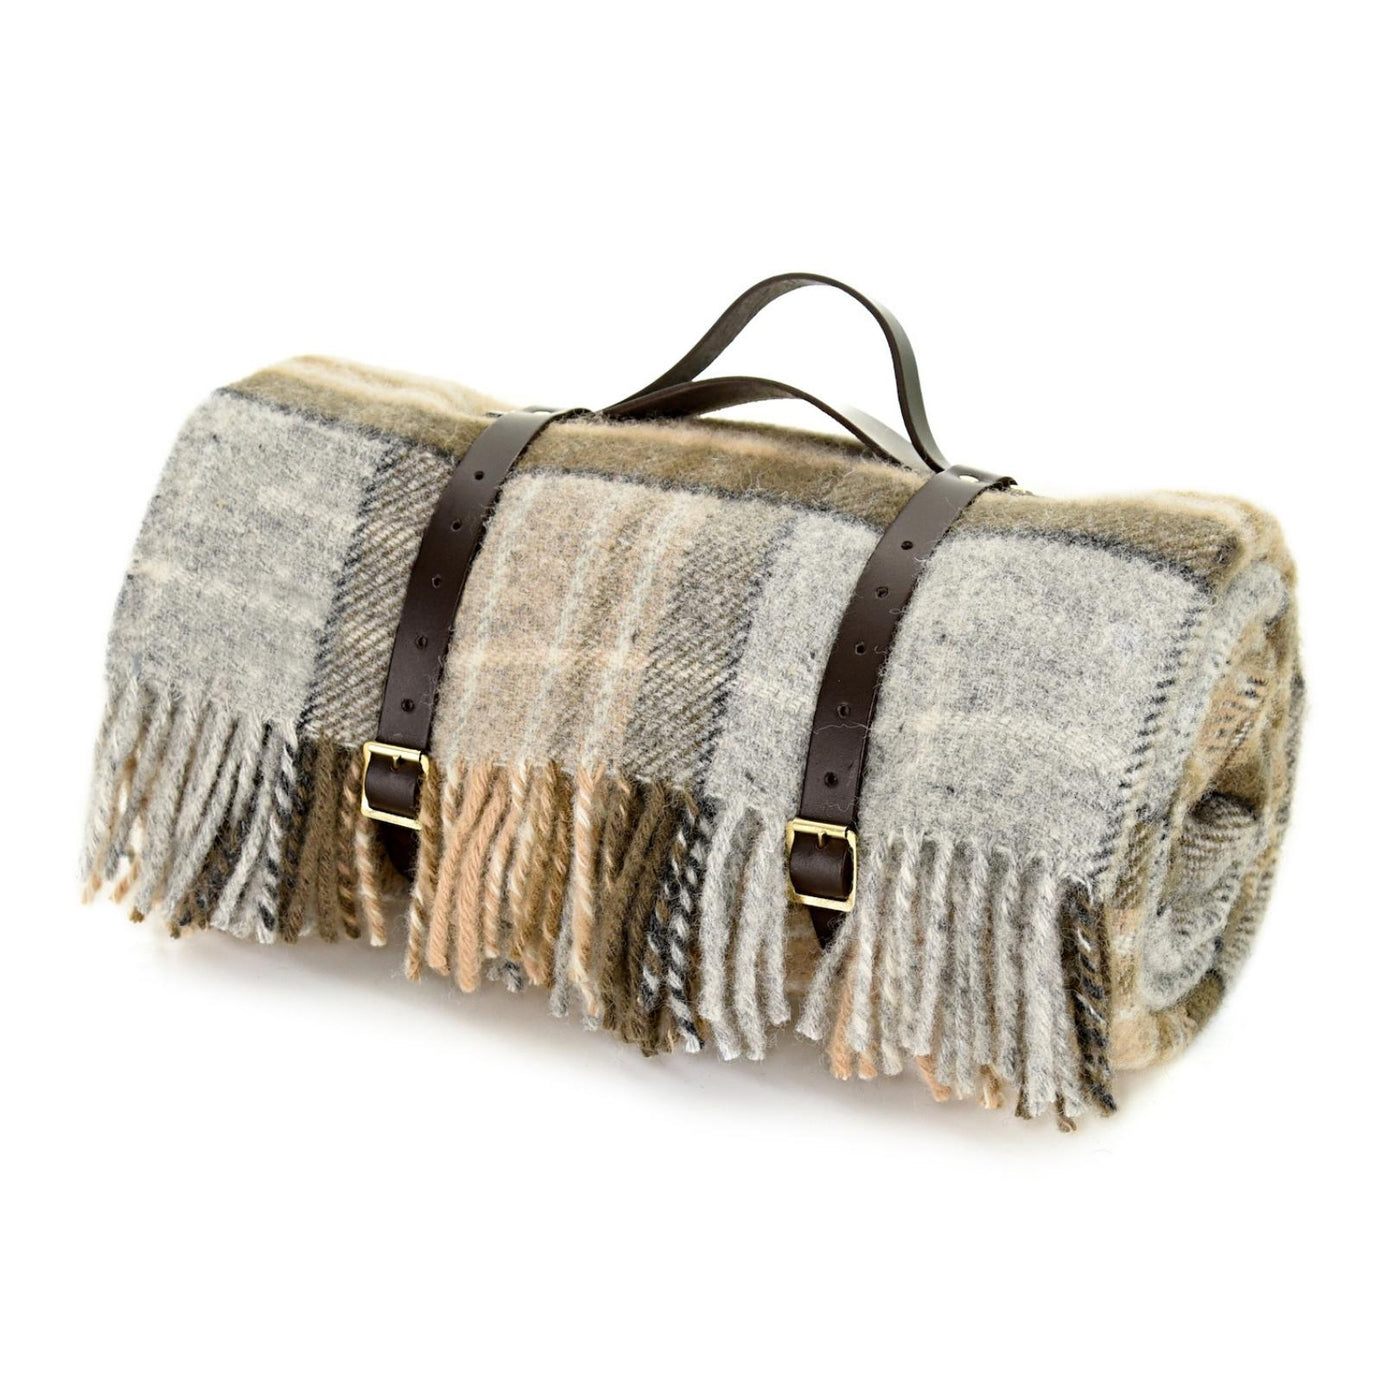 Pure new wool picnic blanket with waterproof backing in McKellar tartan in shades of silver greys and browns, with leather carrier available from the St Andrews Hamper Company.